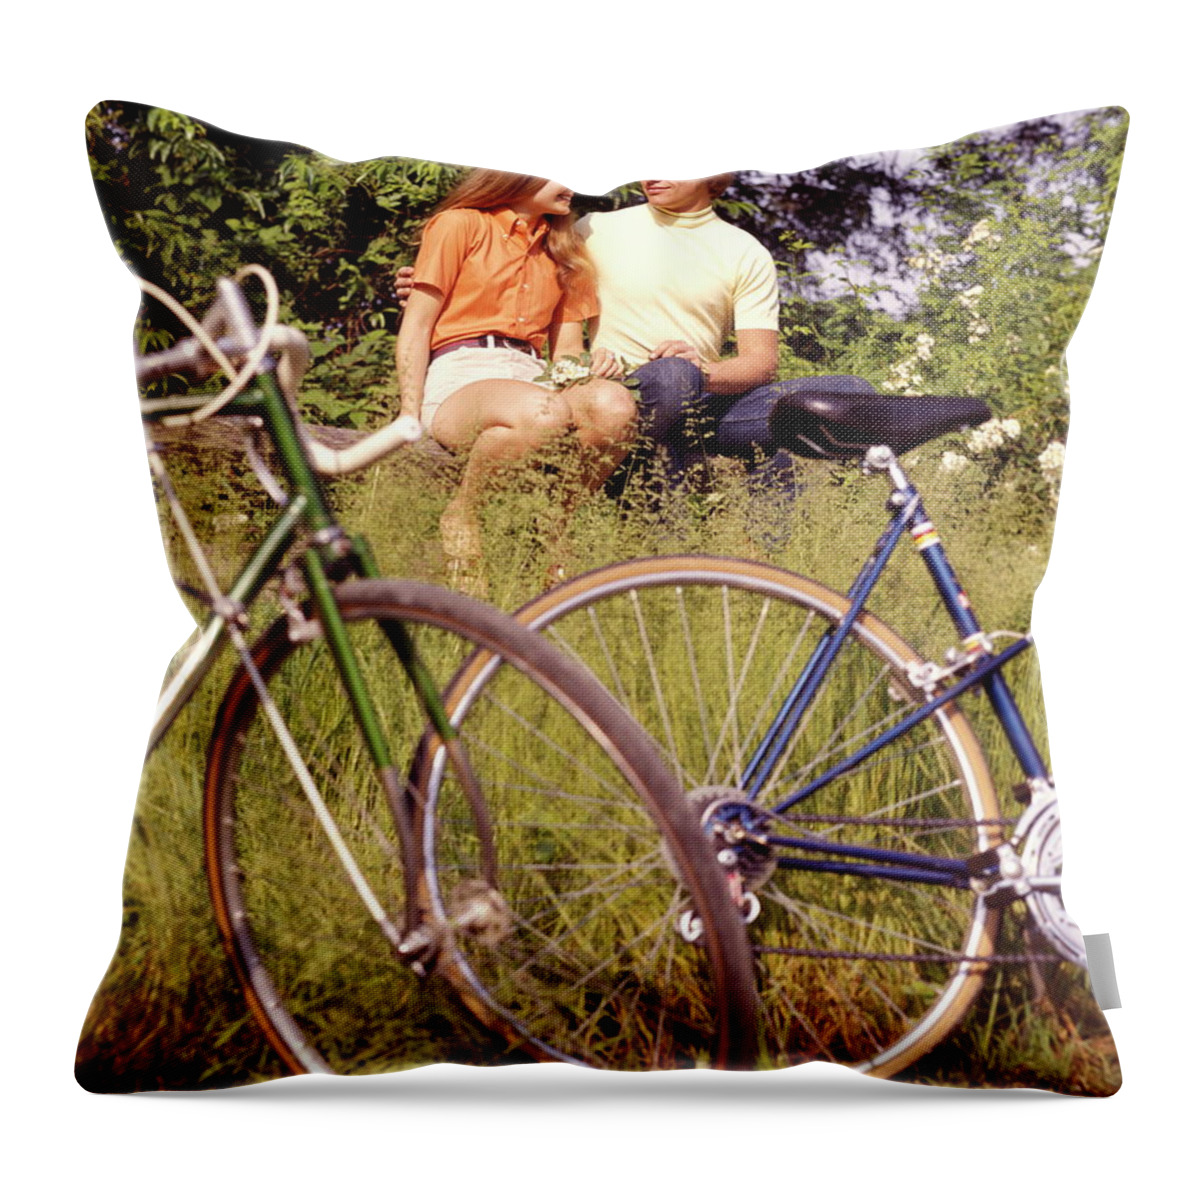 Heterosexual Couple Throw Pillow featuring the photograph Young Adults Teenagers Field Date Bikes by H. Armstrong Roberts